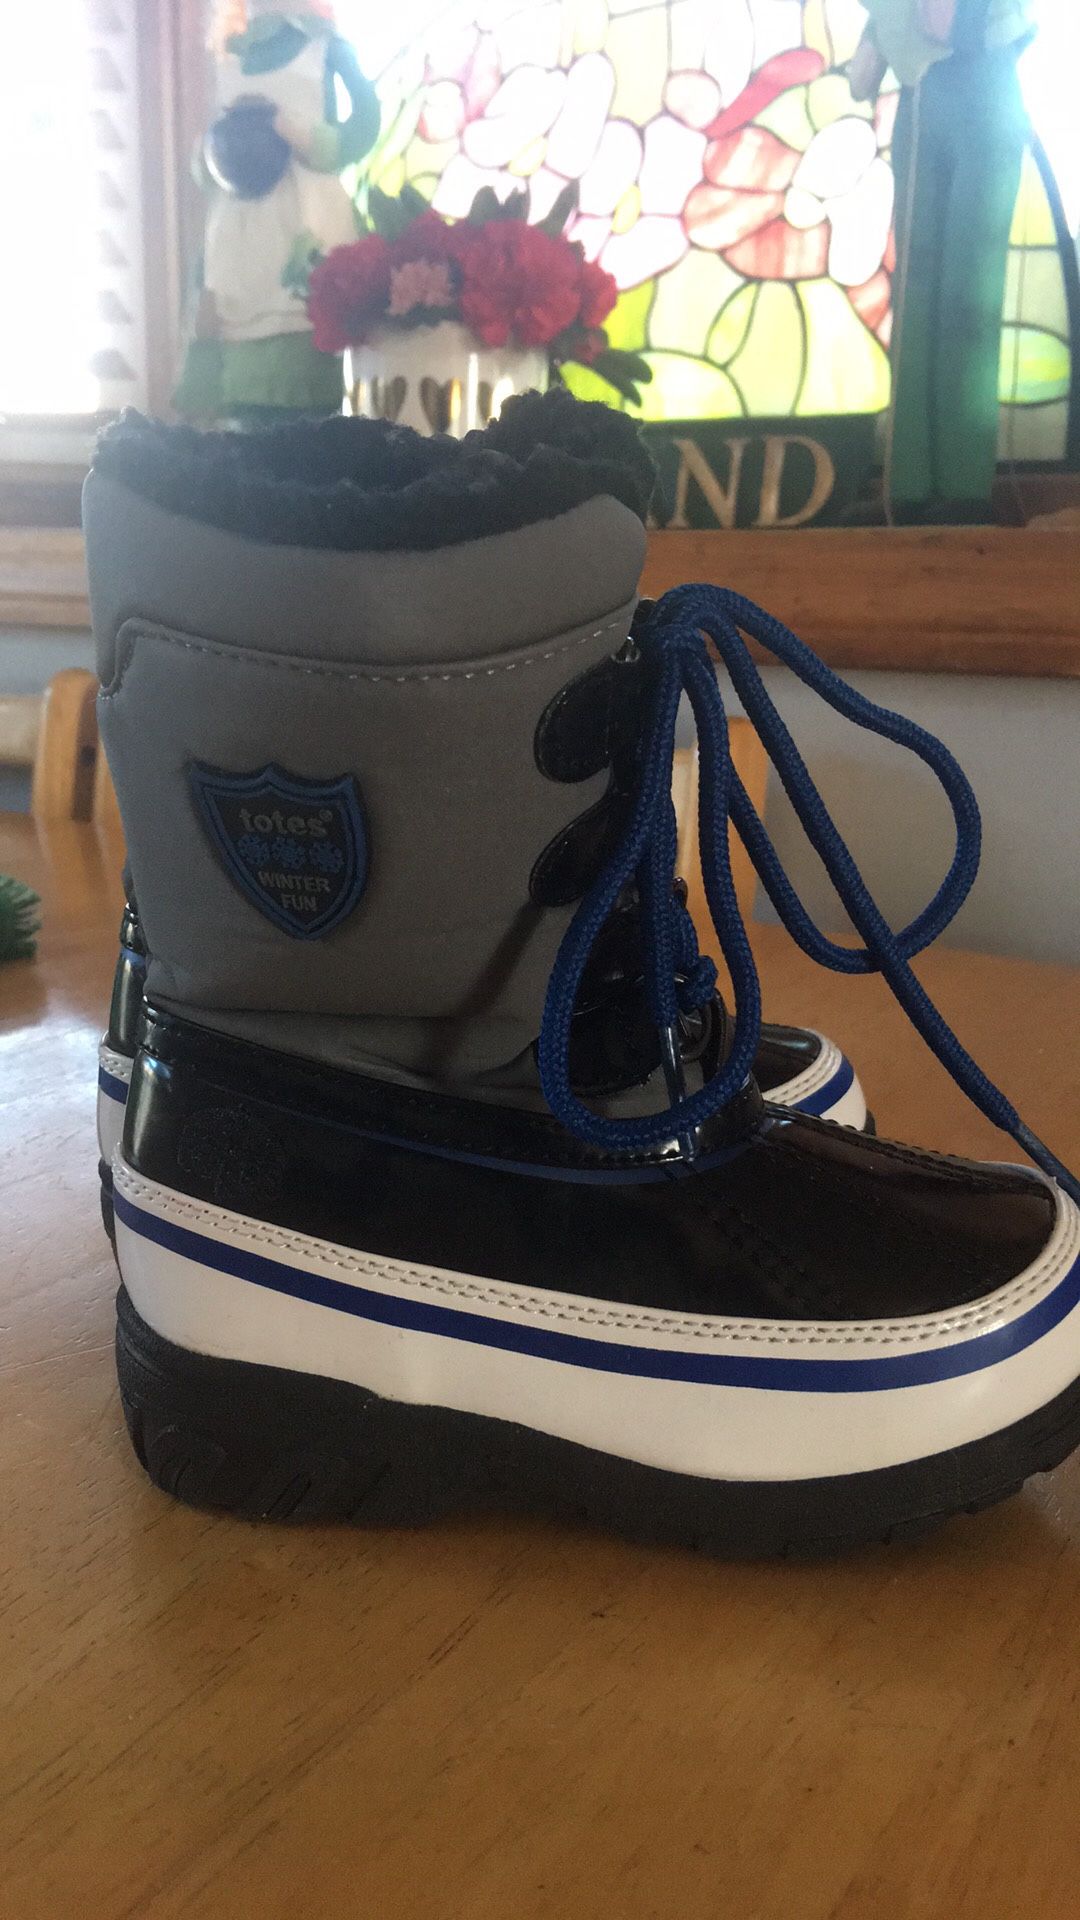 Totes Toddler Boys Snow / Winter Boots - Size 8